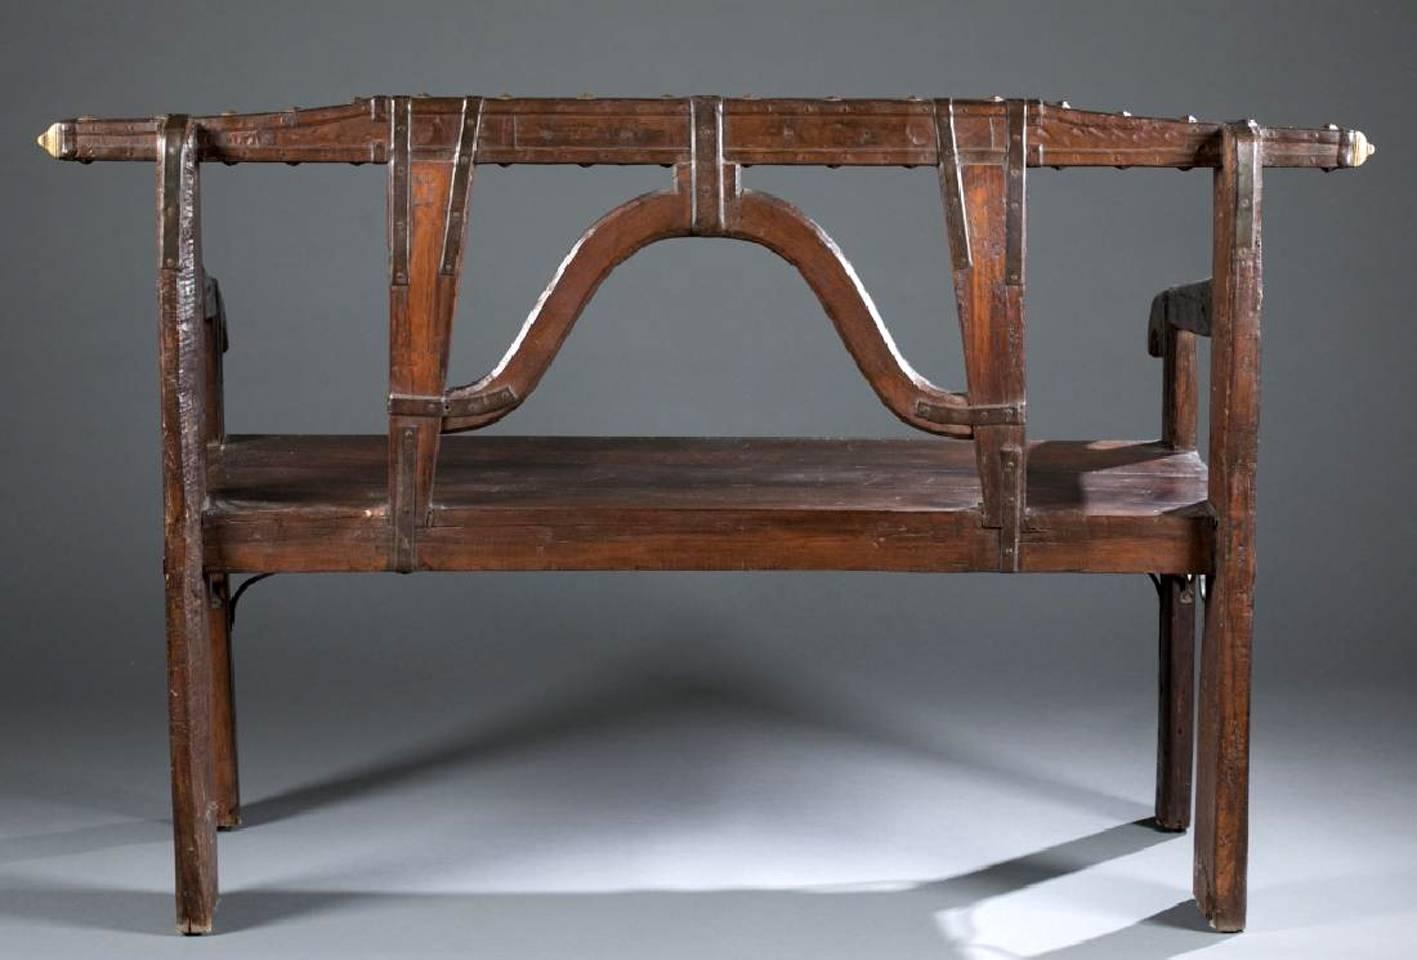 An antique Spanish Colonial bench likely from Peru, circa late 19th century. It displays a wonderful style that was clearly influenced by the indigenous aesthetic. The horse yoke shaped back is adorned with hammered and gilt metal insets, studs and